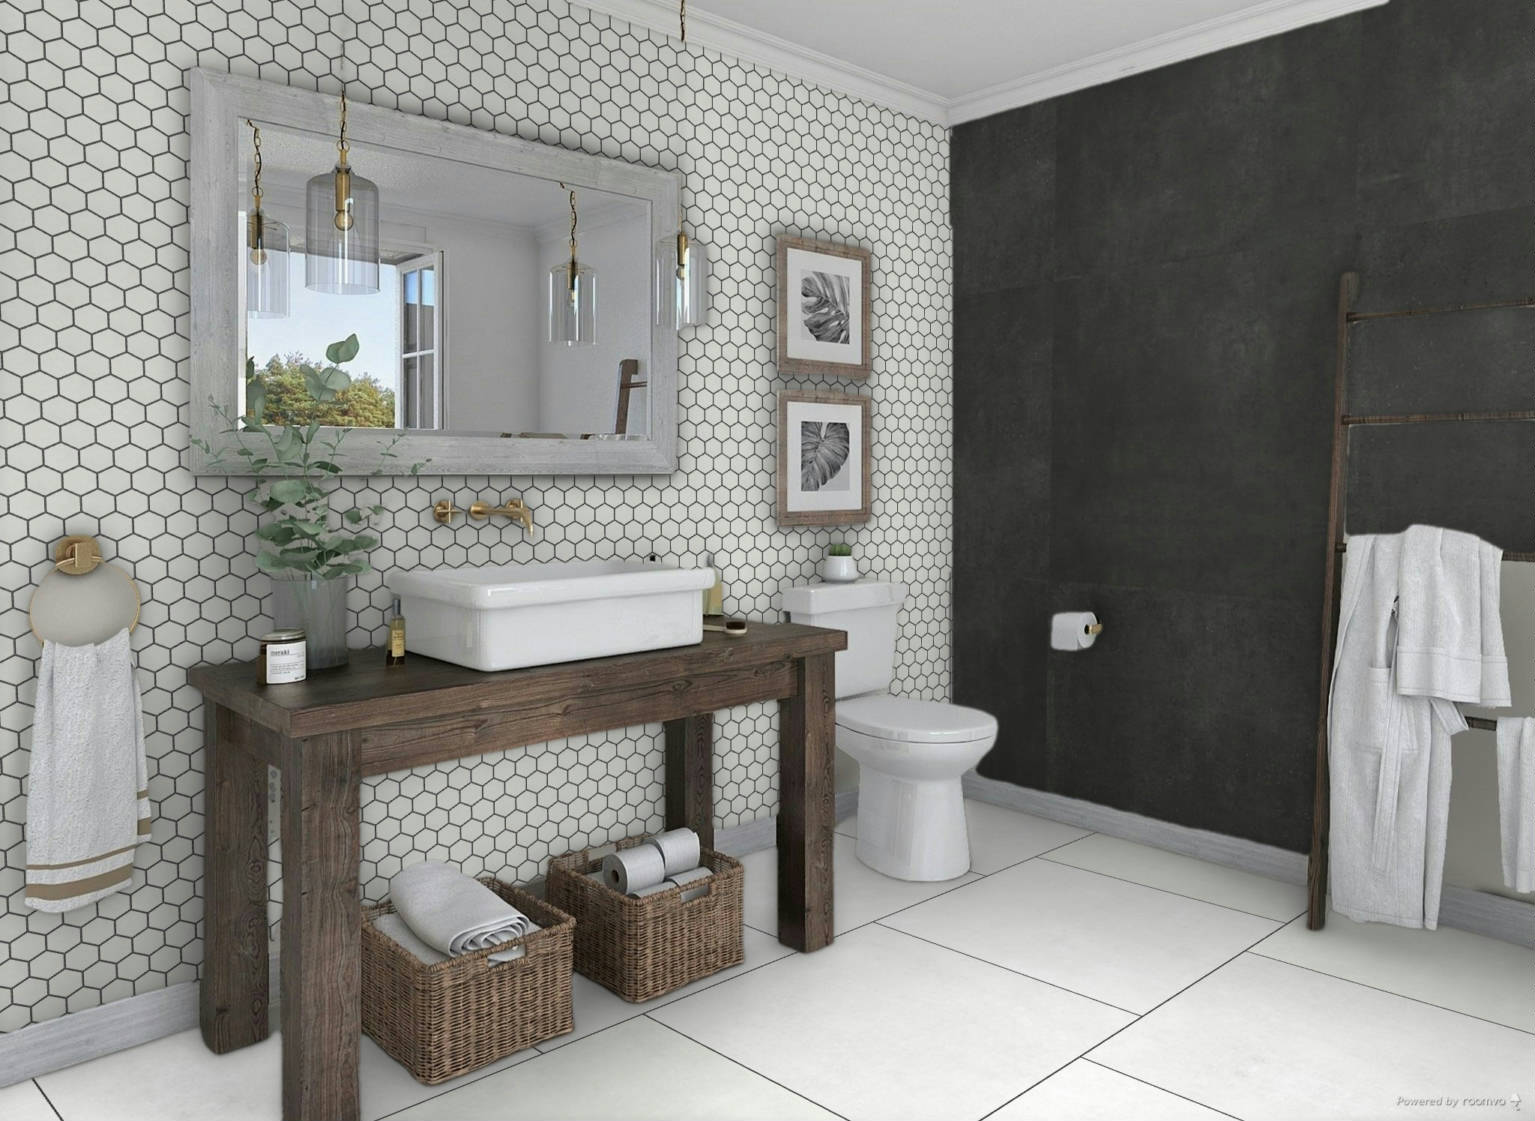 Ashland White 36x36, 3x3 Mosaic, and 48x48 Black | Qualis Ceramica | Luxury Tile and Vinyl at affordable prices